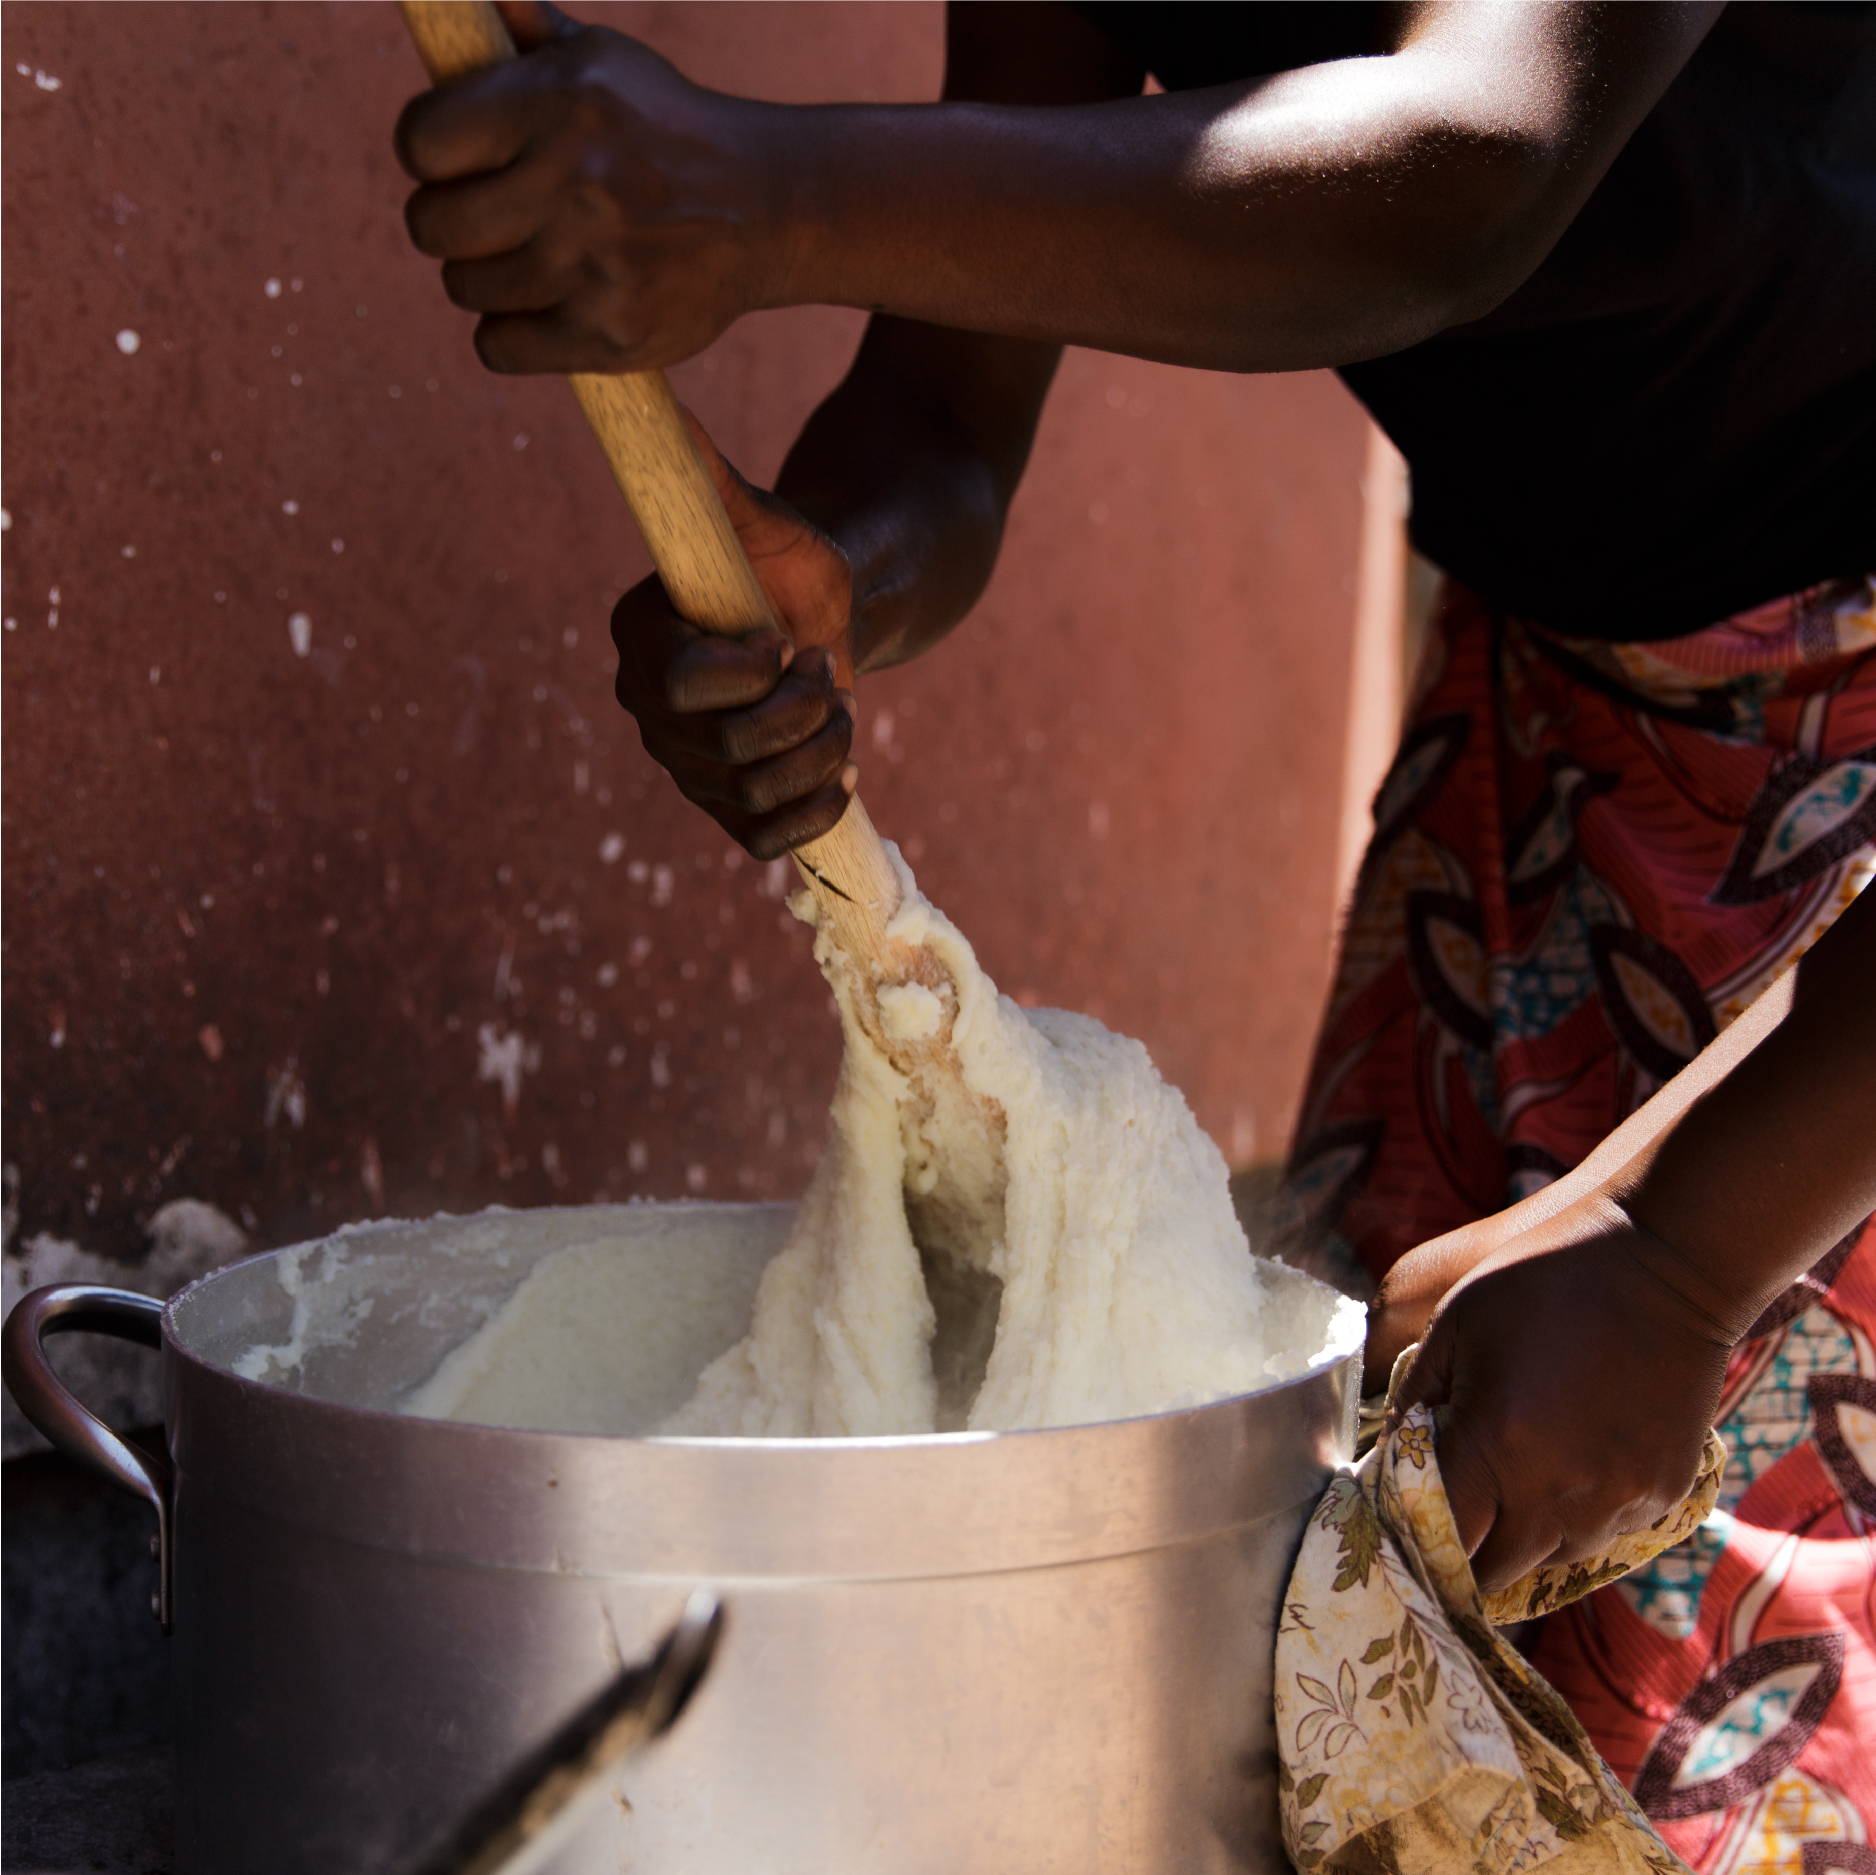 A Zambian women wearing a red skirt stands outside stirring a large stainless steel pot of nshima. 